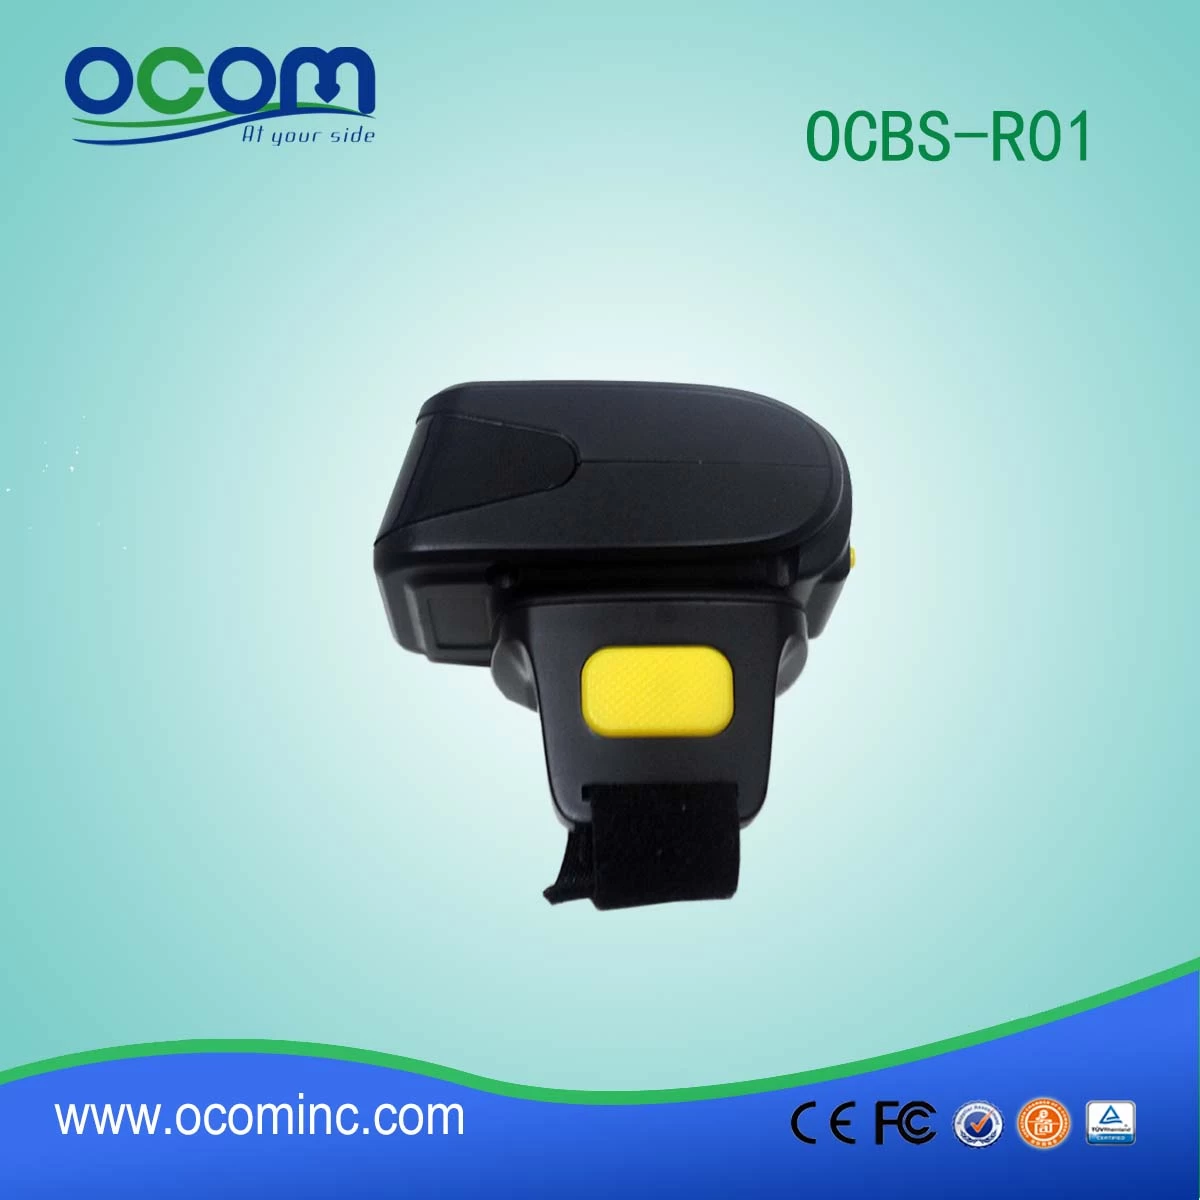 OCBS-R01 lowest price small and Wearable bluetooth barcode reader